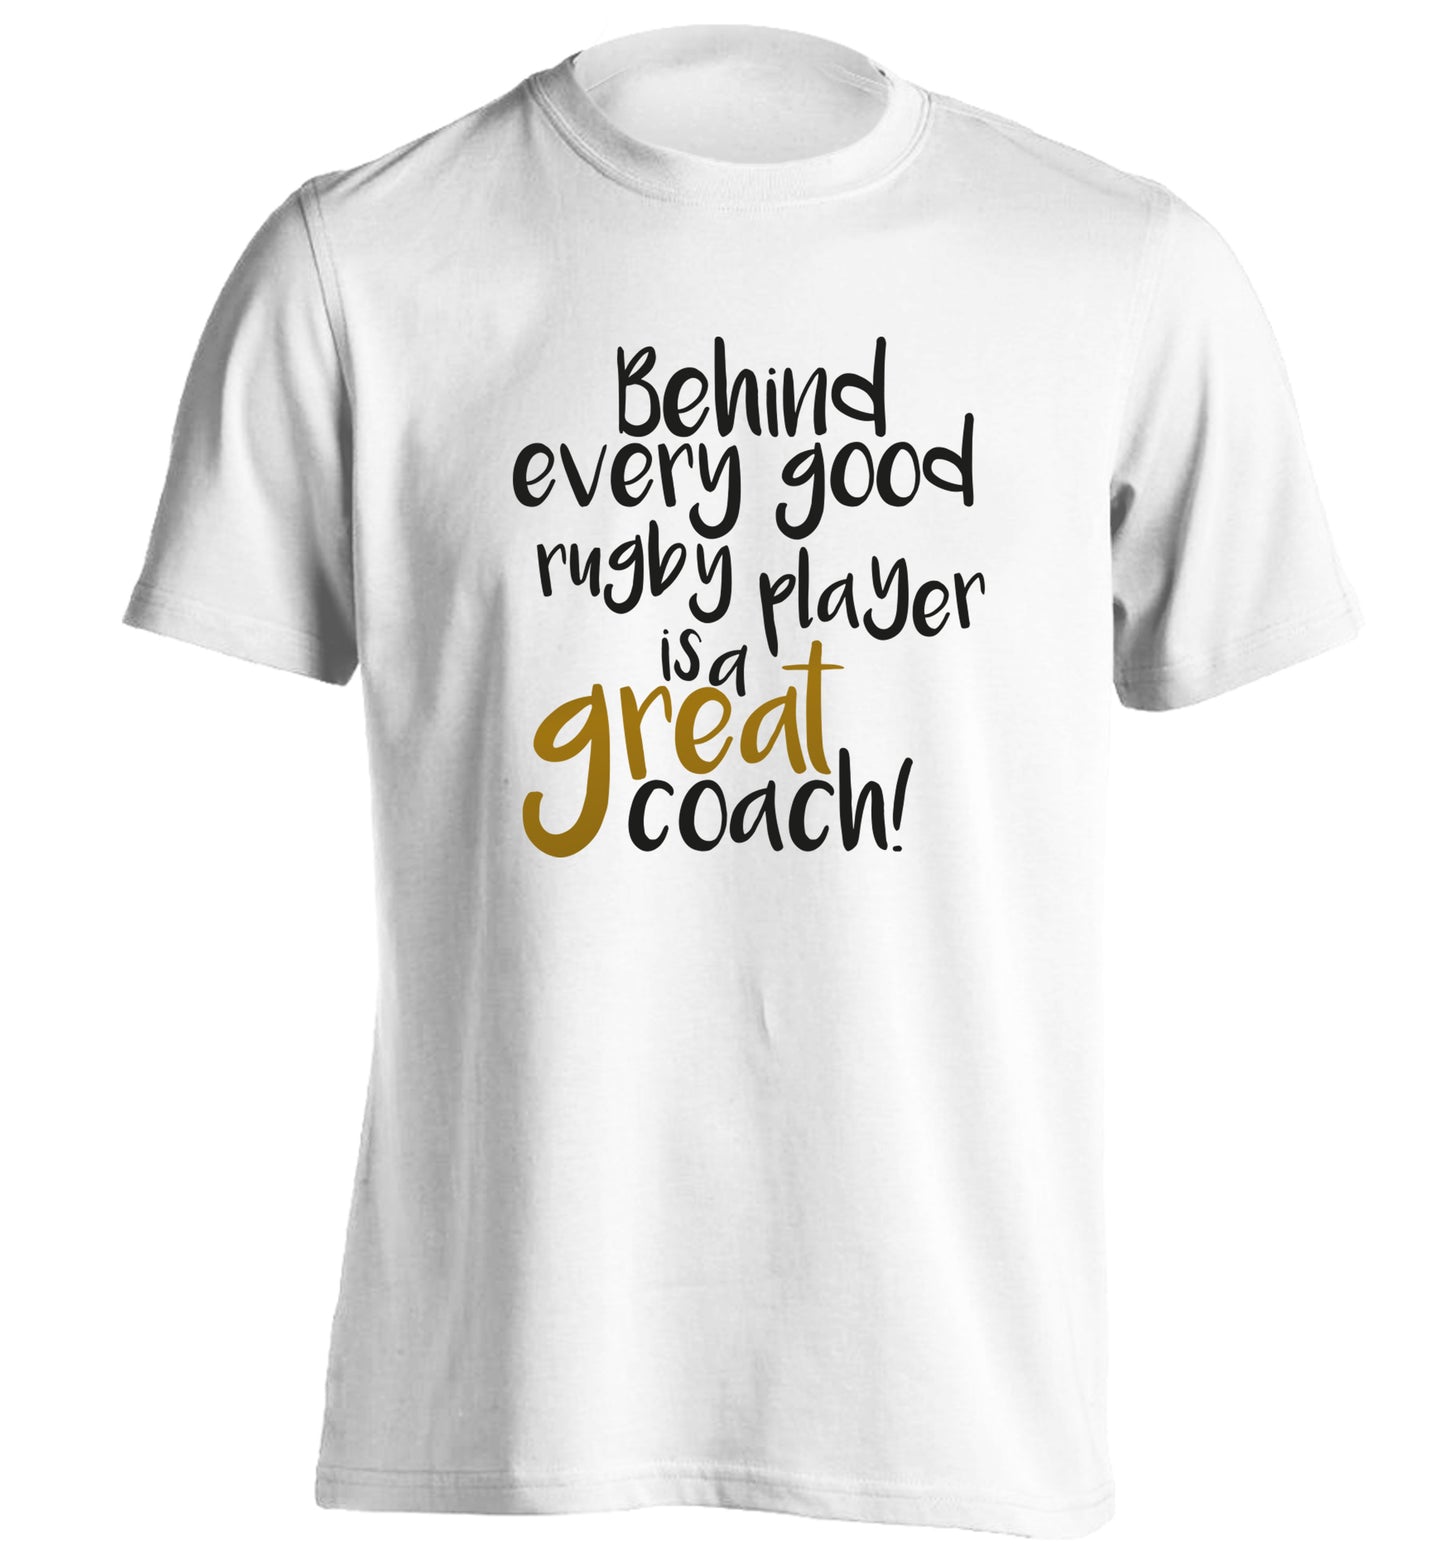 Behind every goor rugby player is a great coach adults unisex white Tshirt 2XL